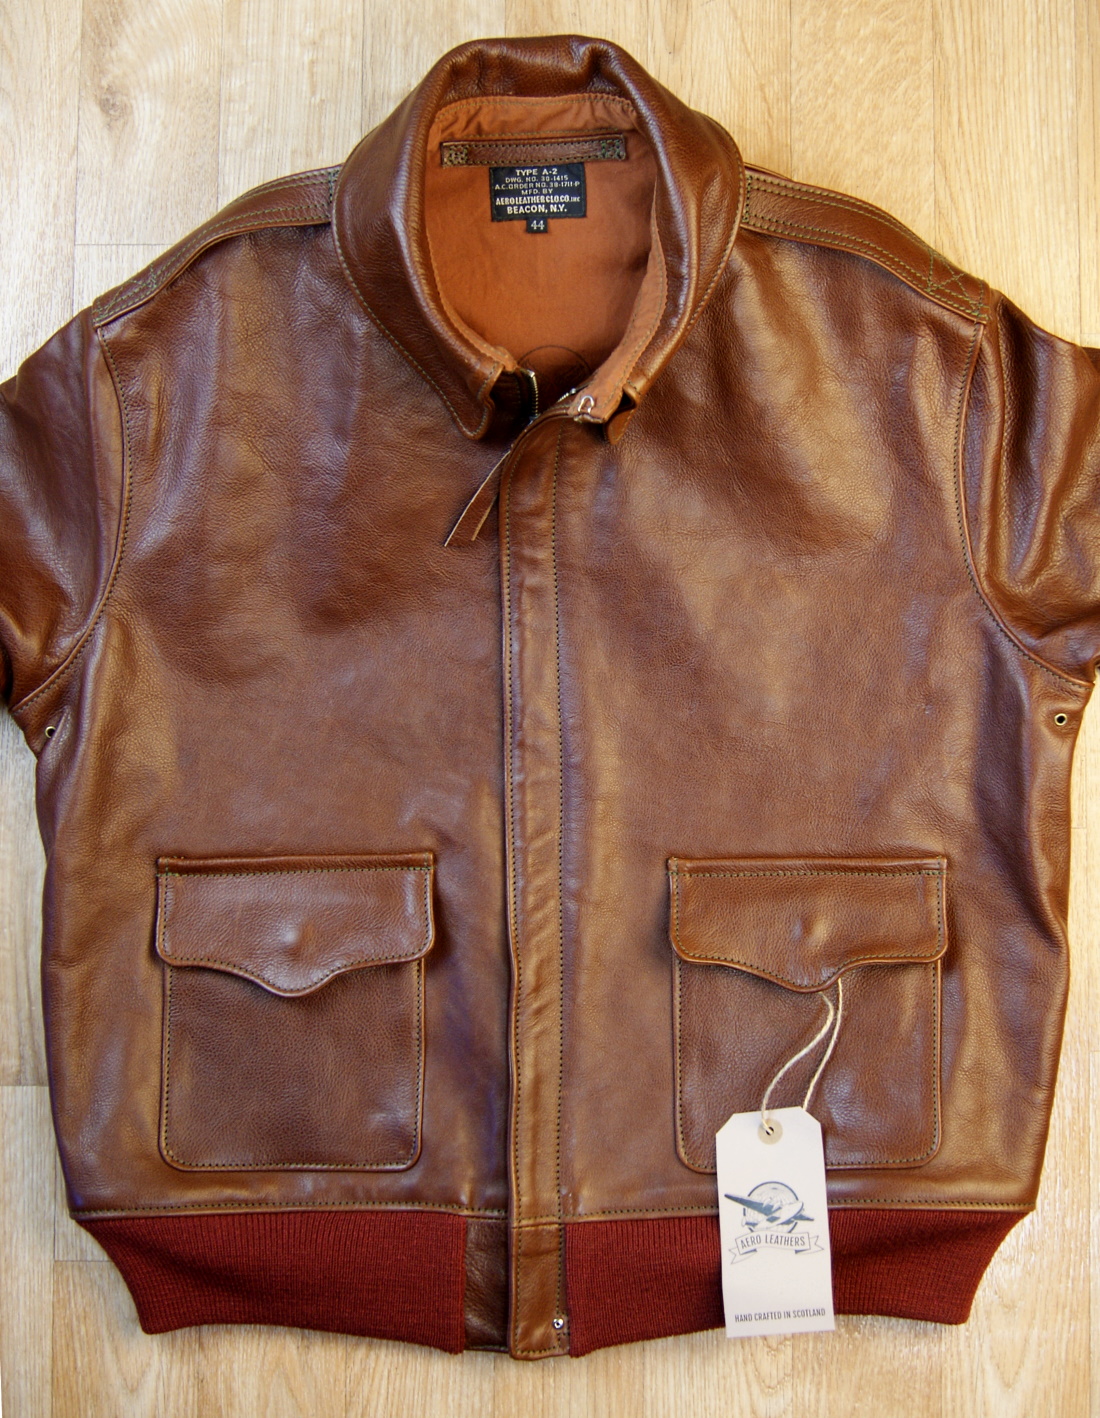 Aero 38-1711 A-2 Russet Vicenza Horsehide front.jpg